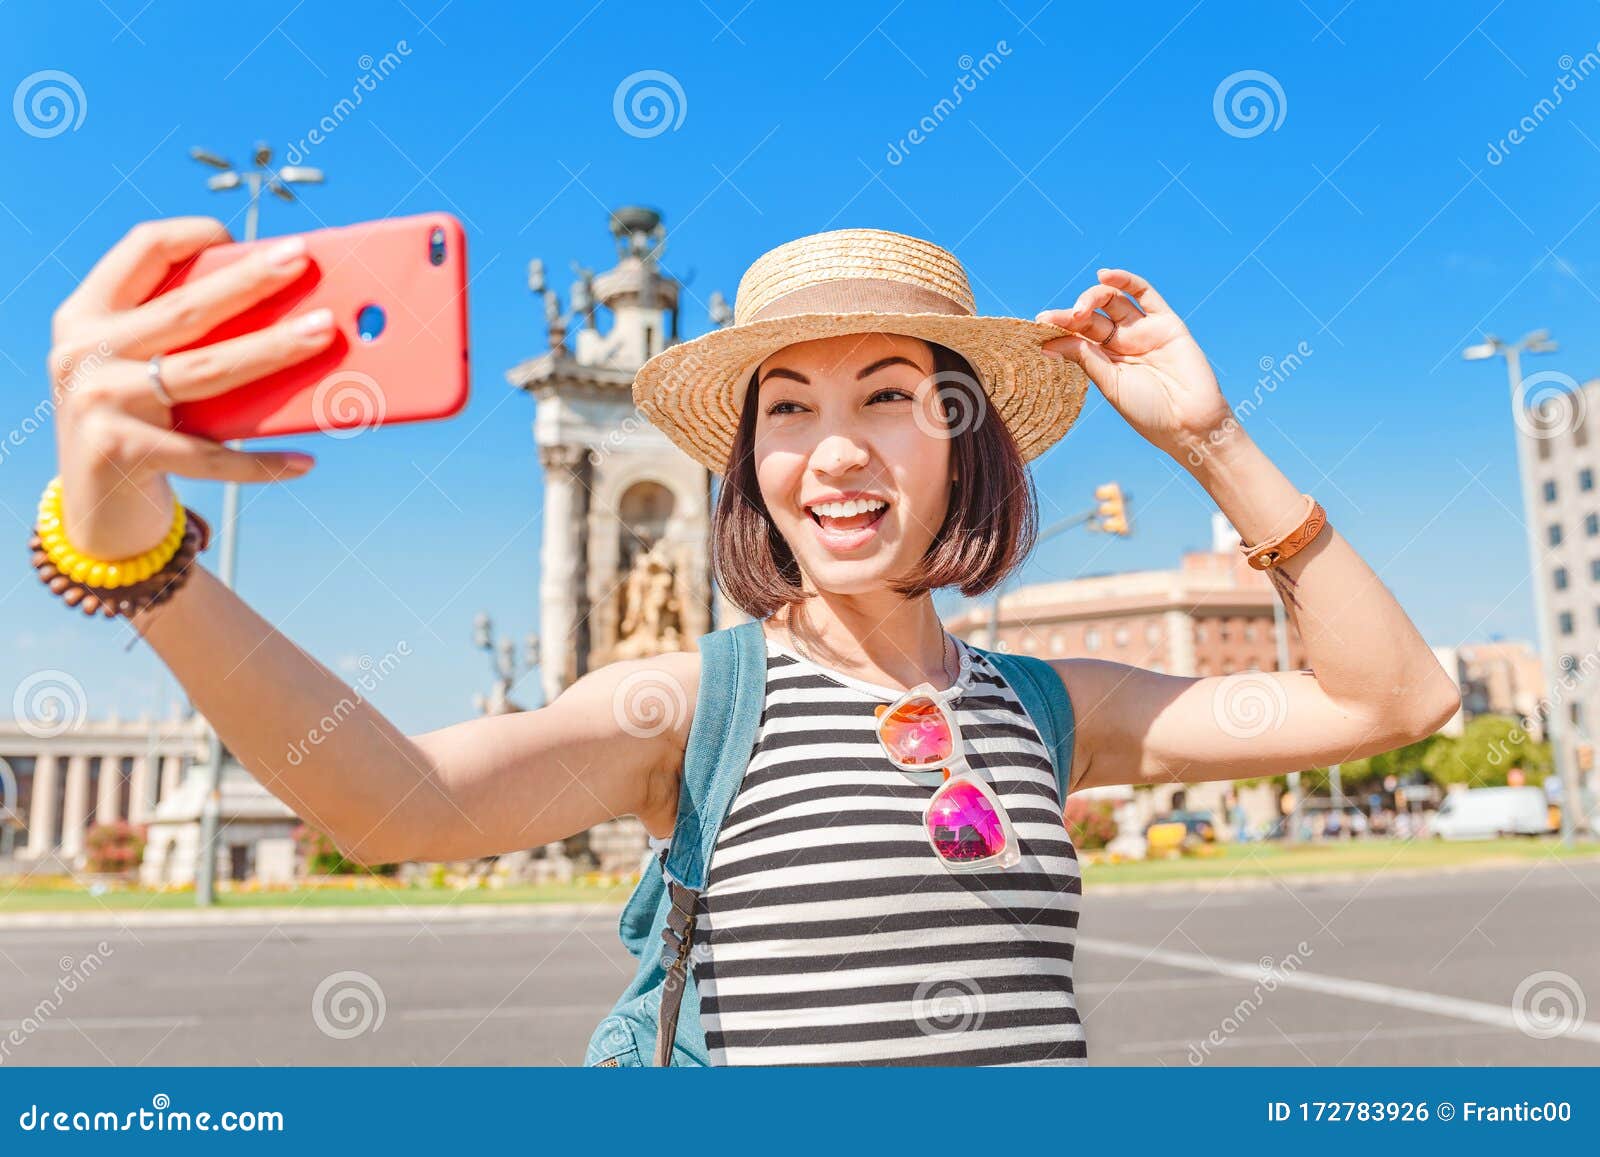 Woman Tourist Making Selfie Photo at the Spain Square in Barcelona City ...